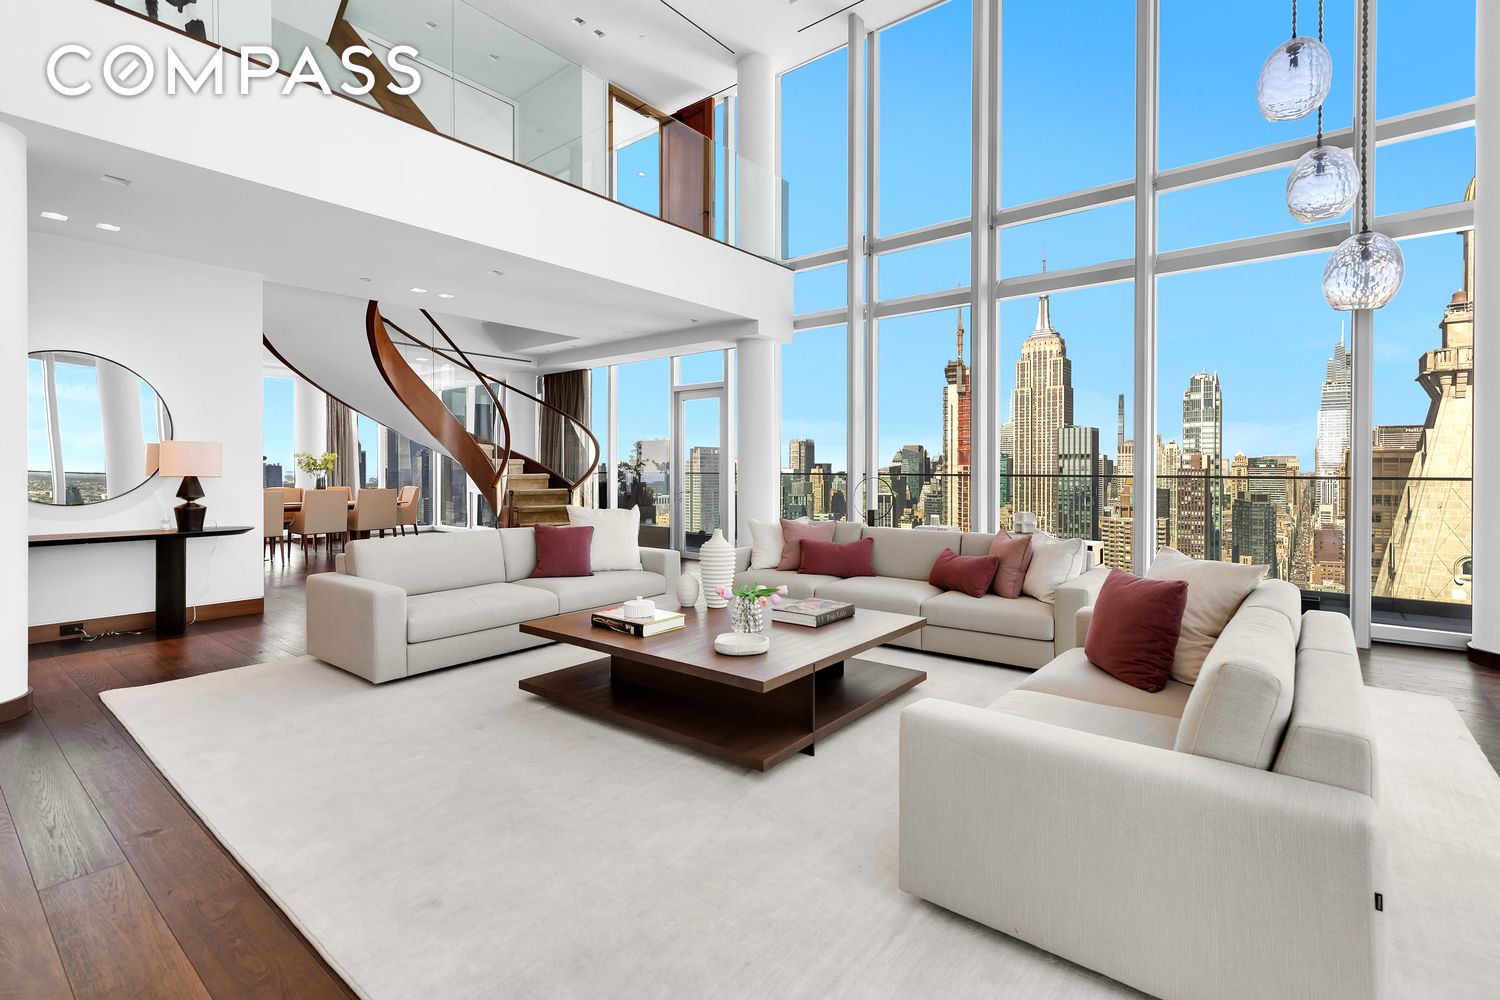 23 East 22nd Street Ph, Flatiron, Downtown, NYC - 5 Bedrooms  
6.5 Bathrooms  
11 Rooms - 